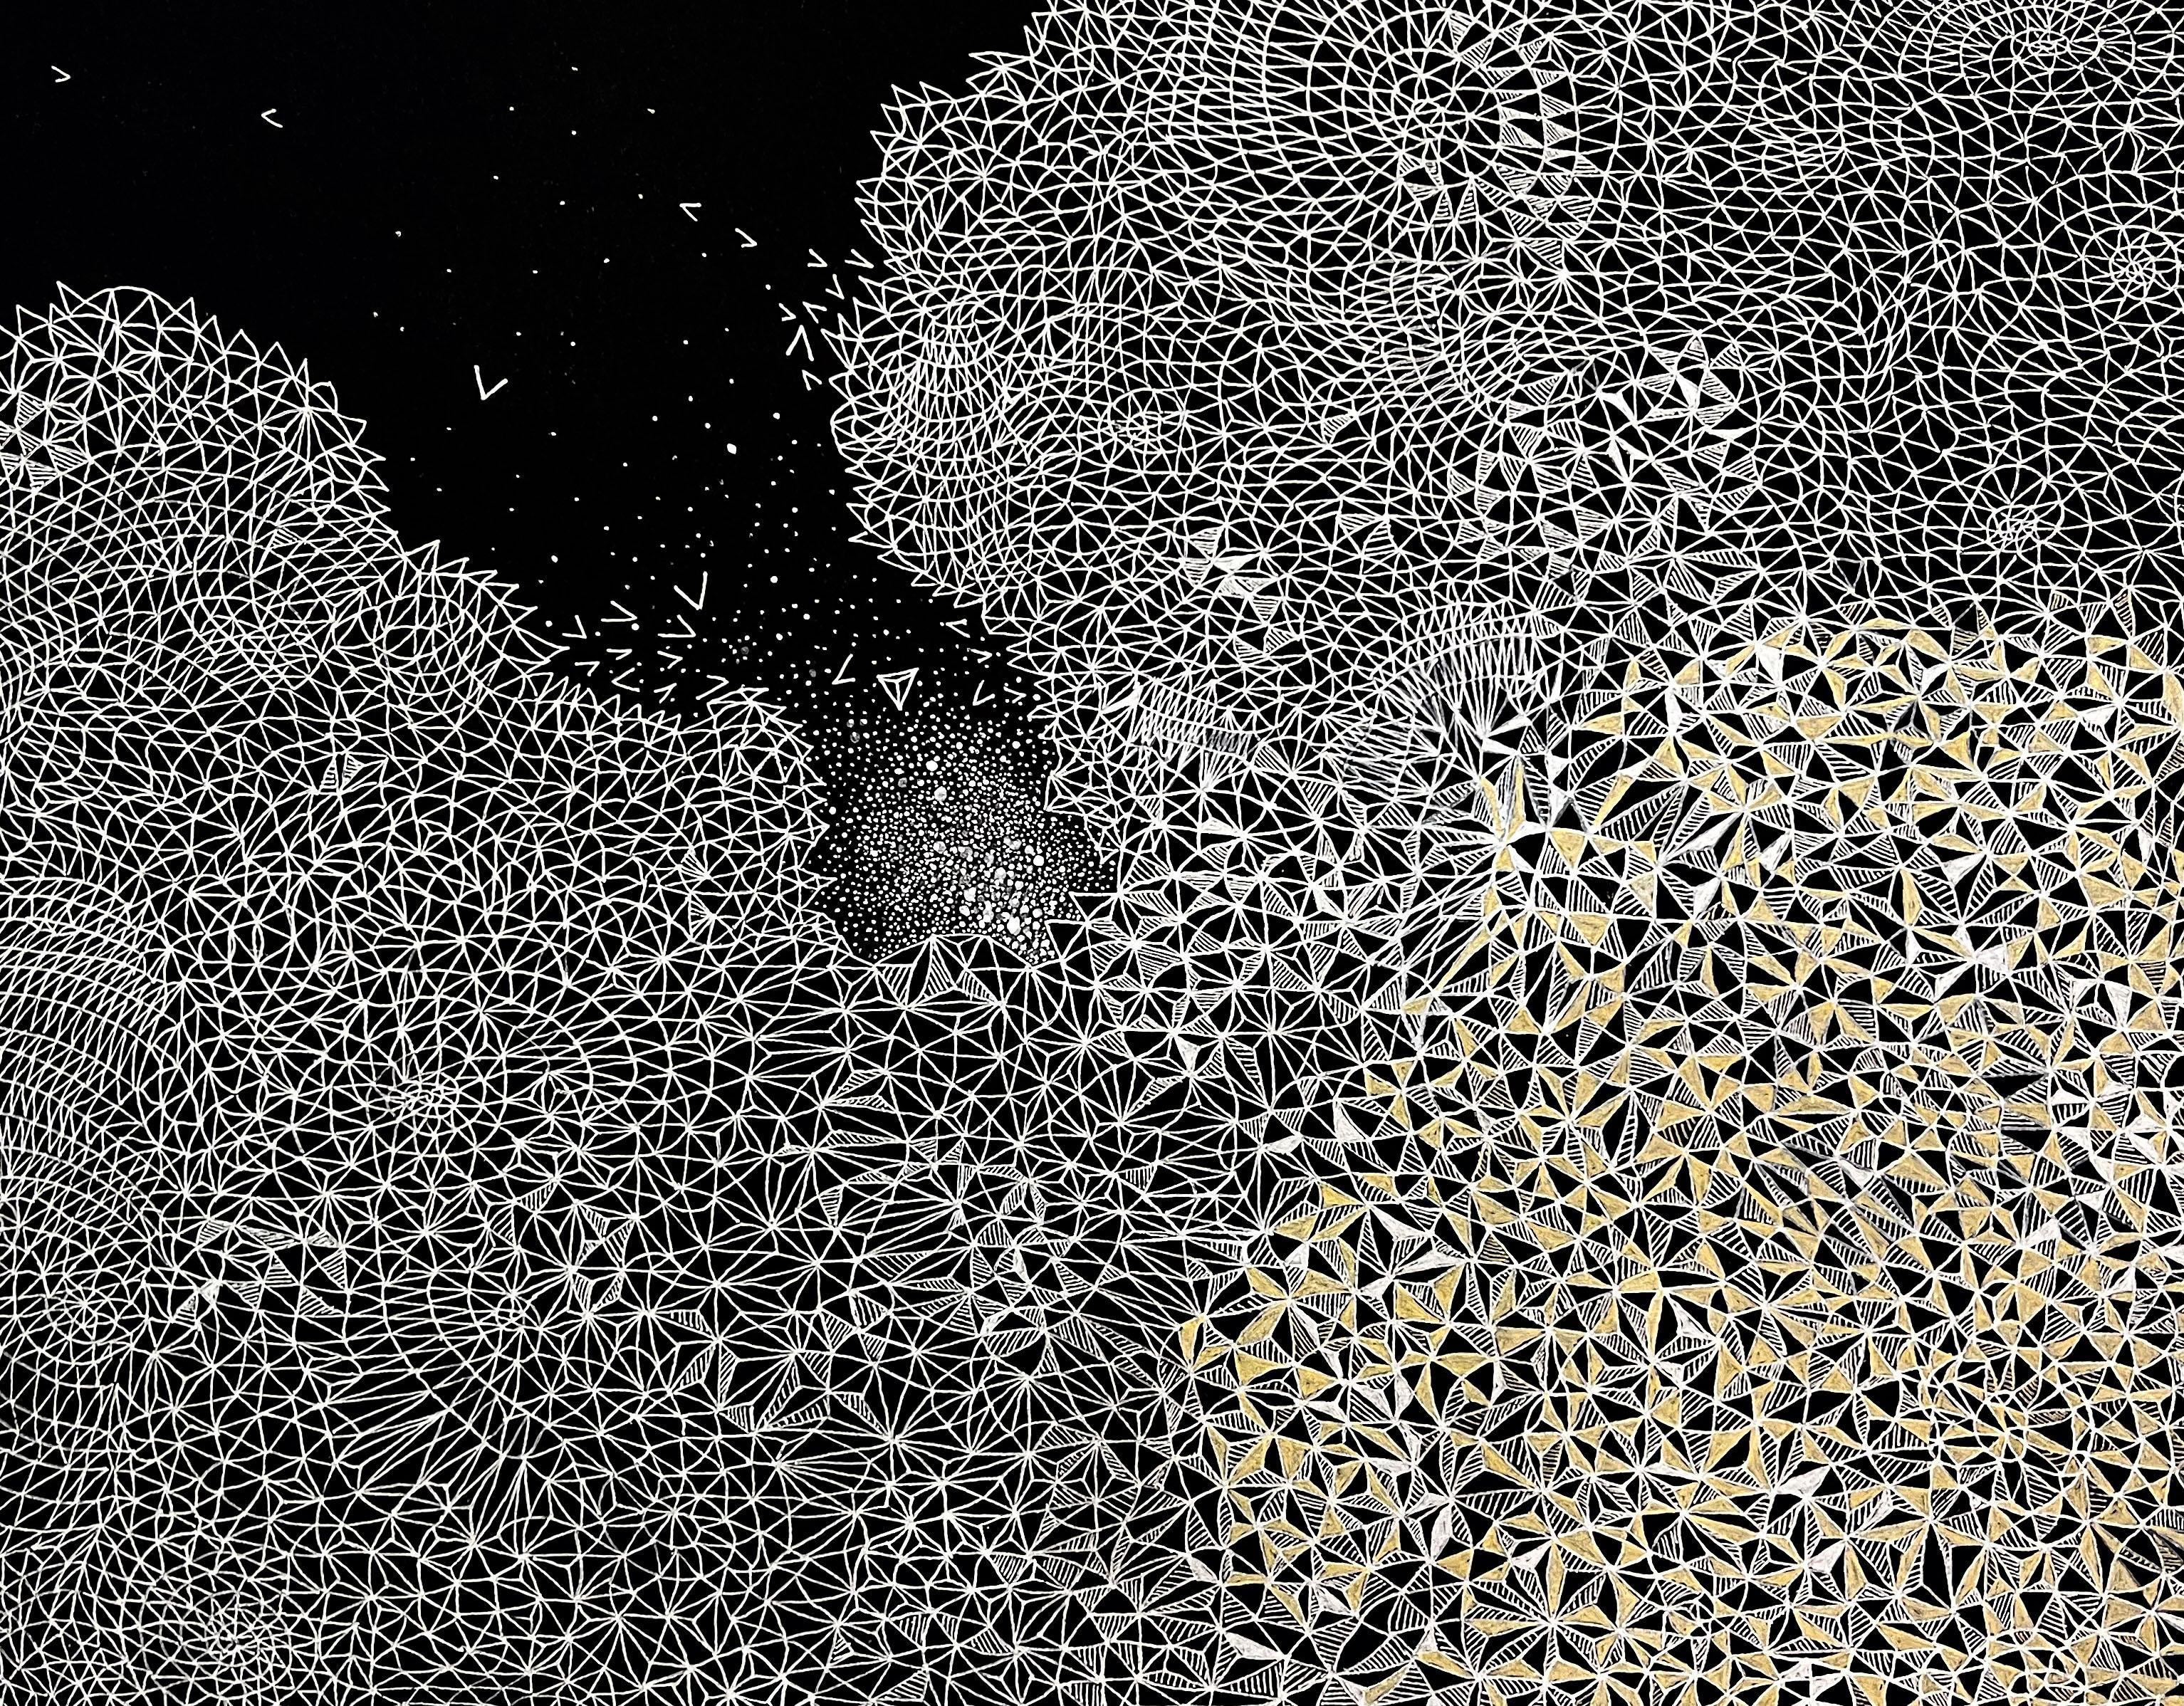 The frontier of the eternal, paper, gold, black and white, constellations, lines - Art by Curra Rueda